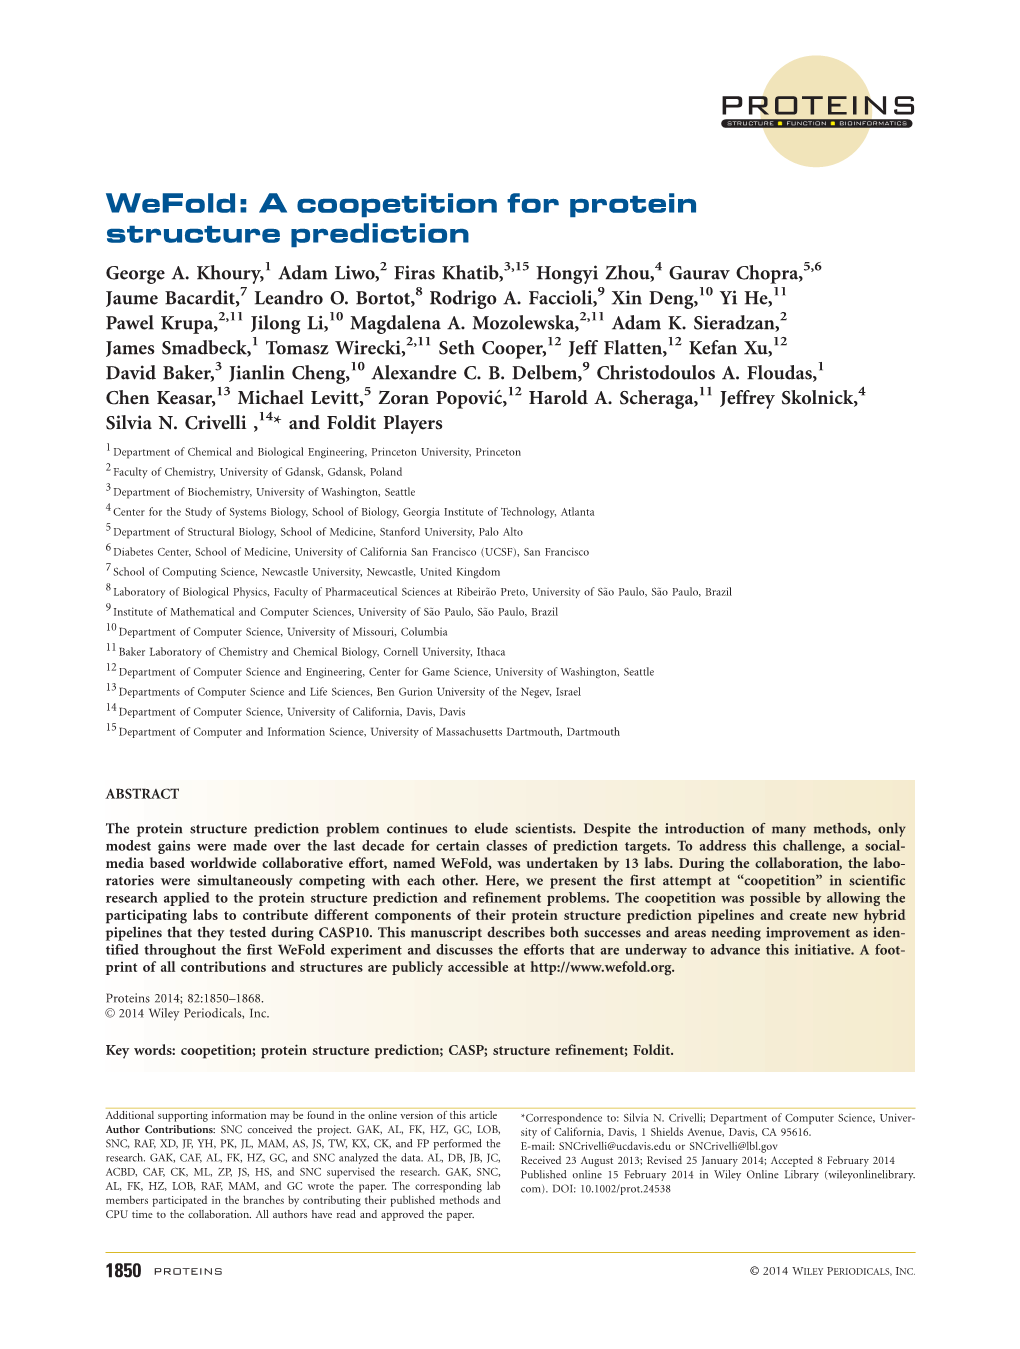 Wefold: a Coopetition for Protein Structure Prediction George A